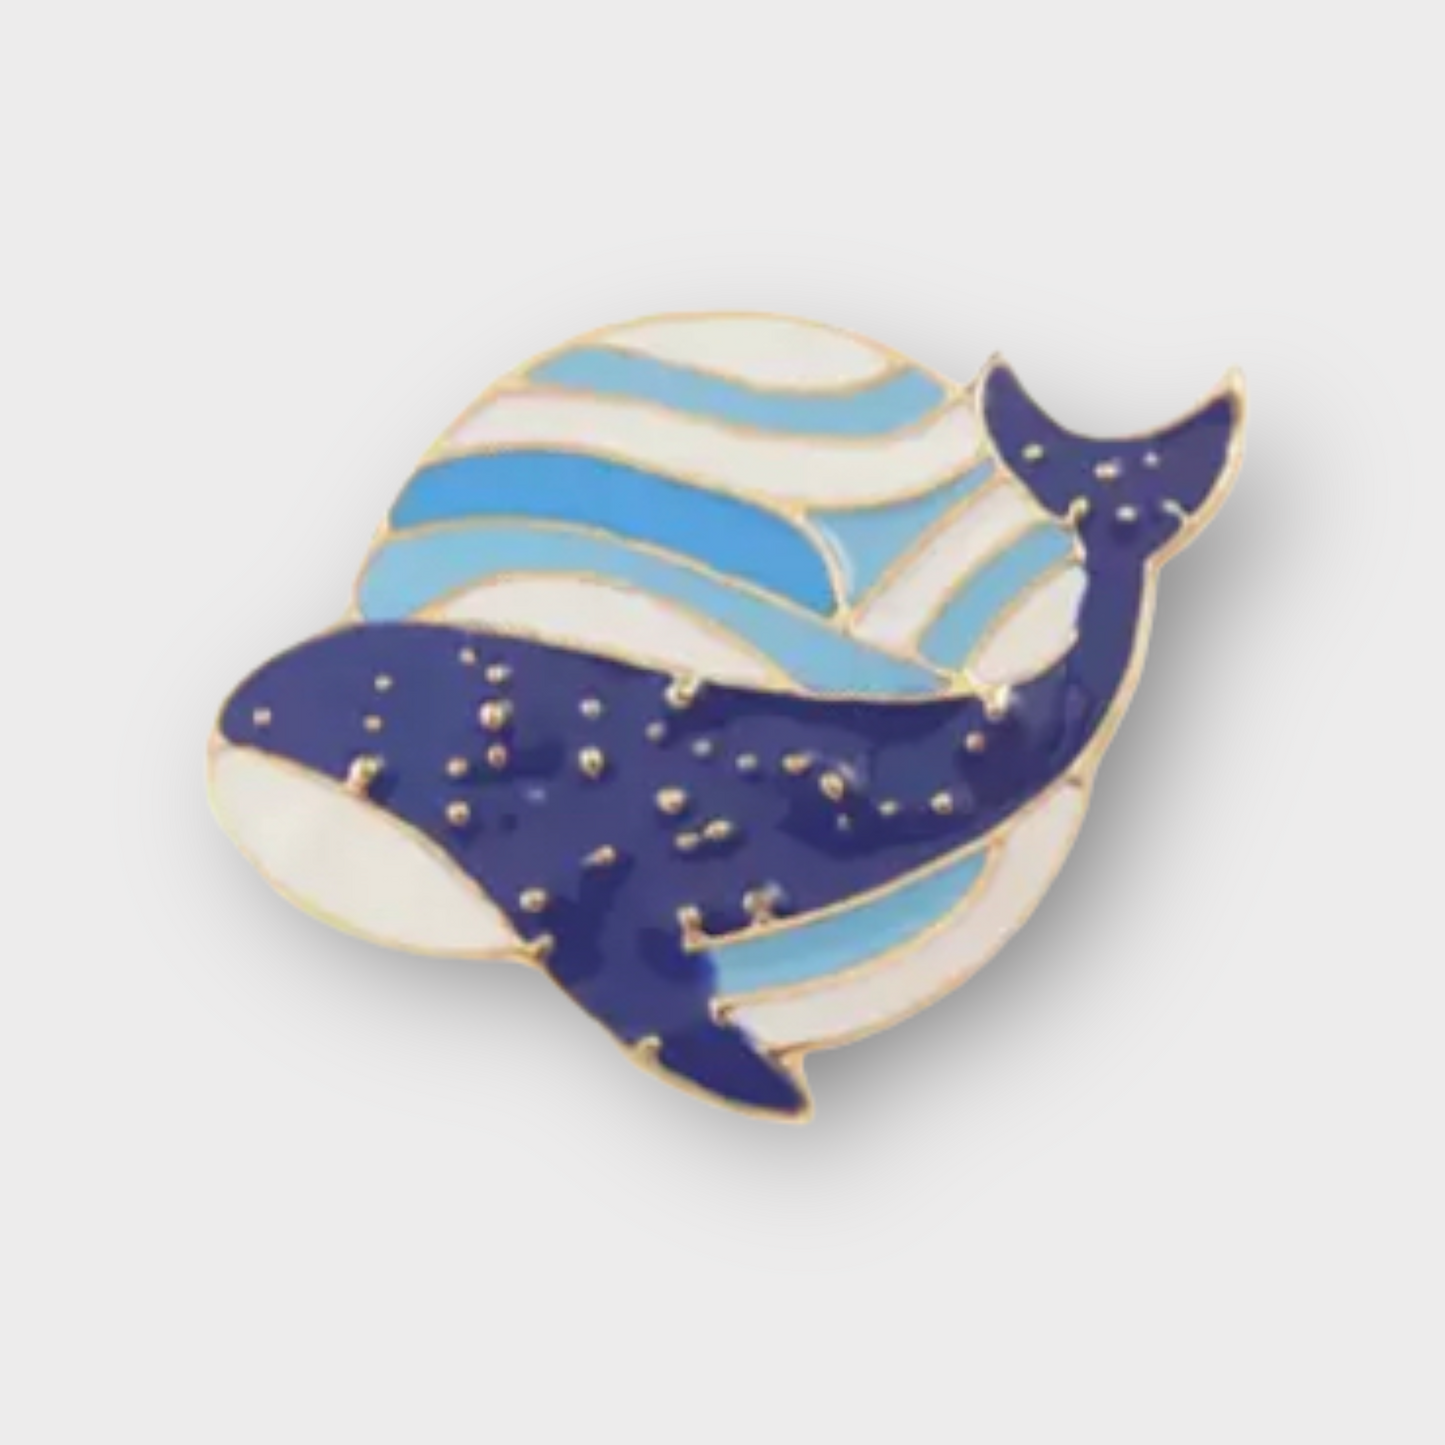 Ride the Wave Pin